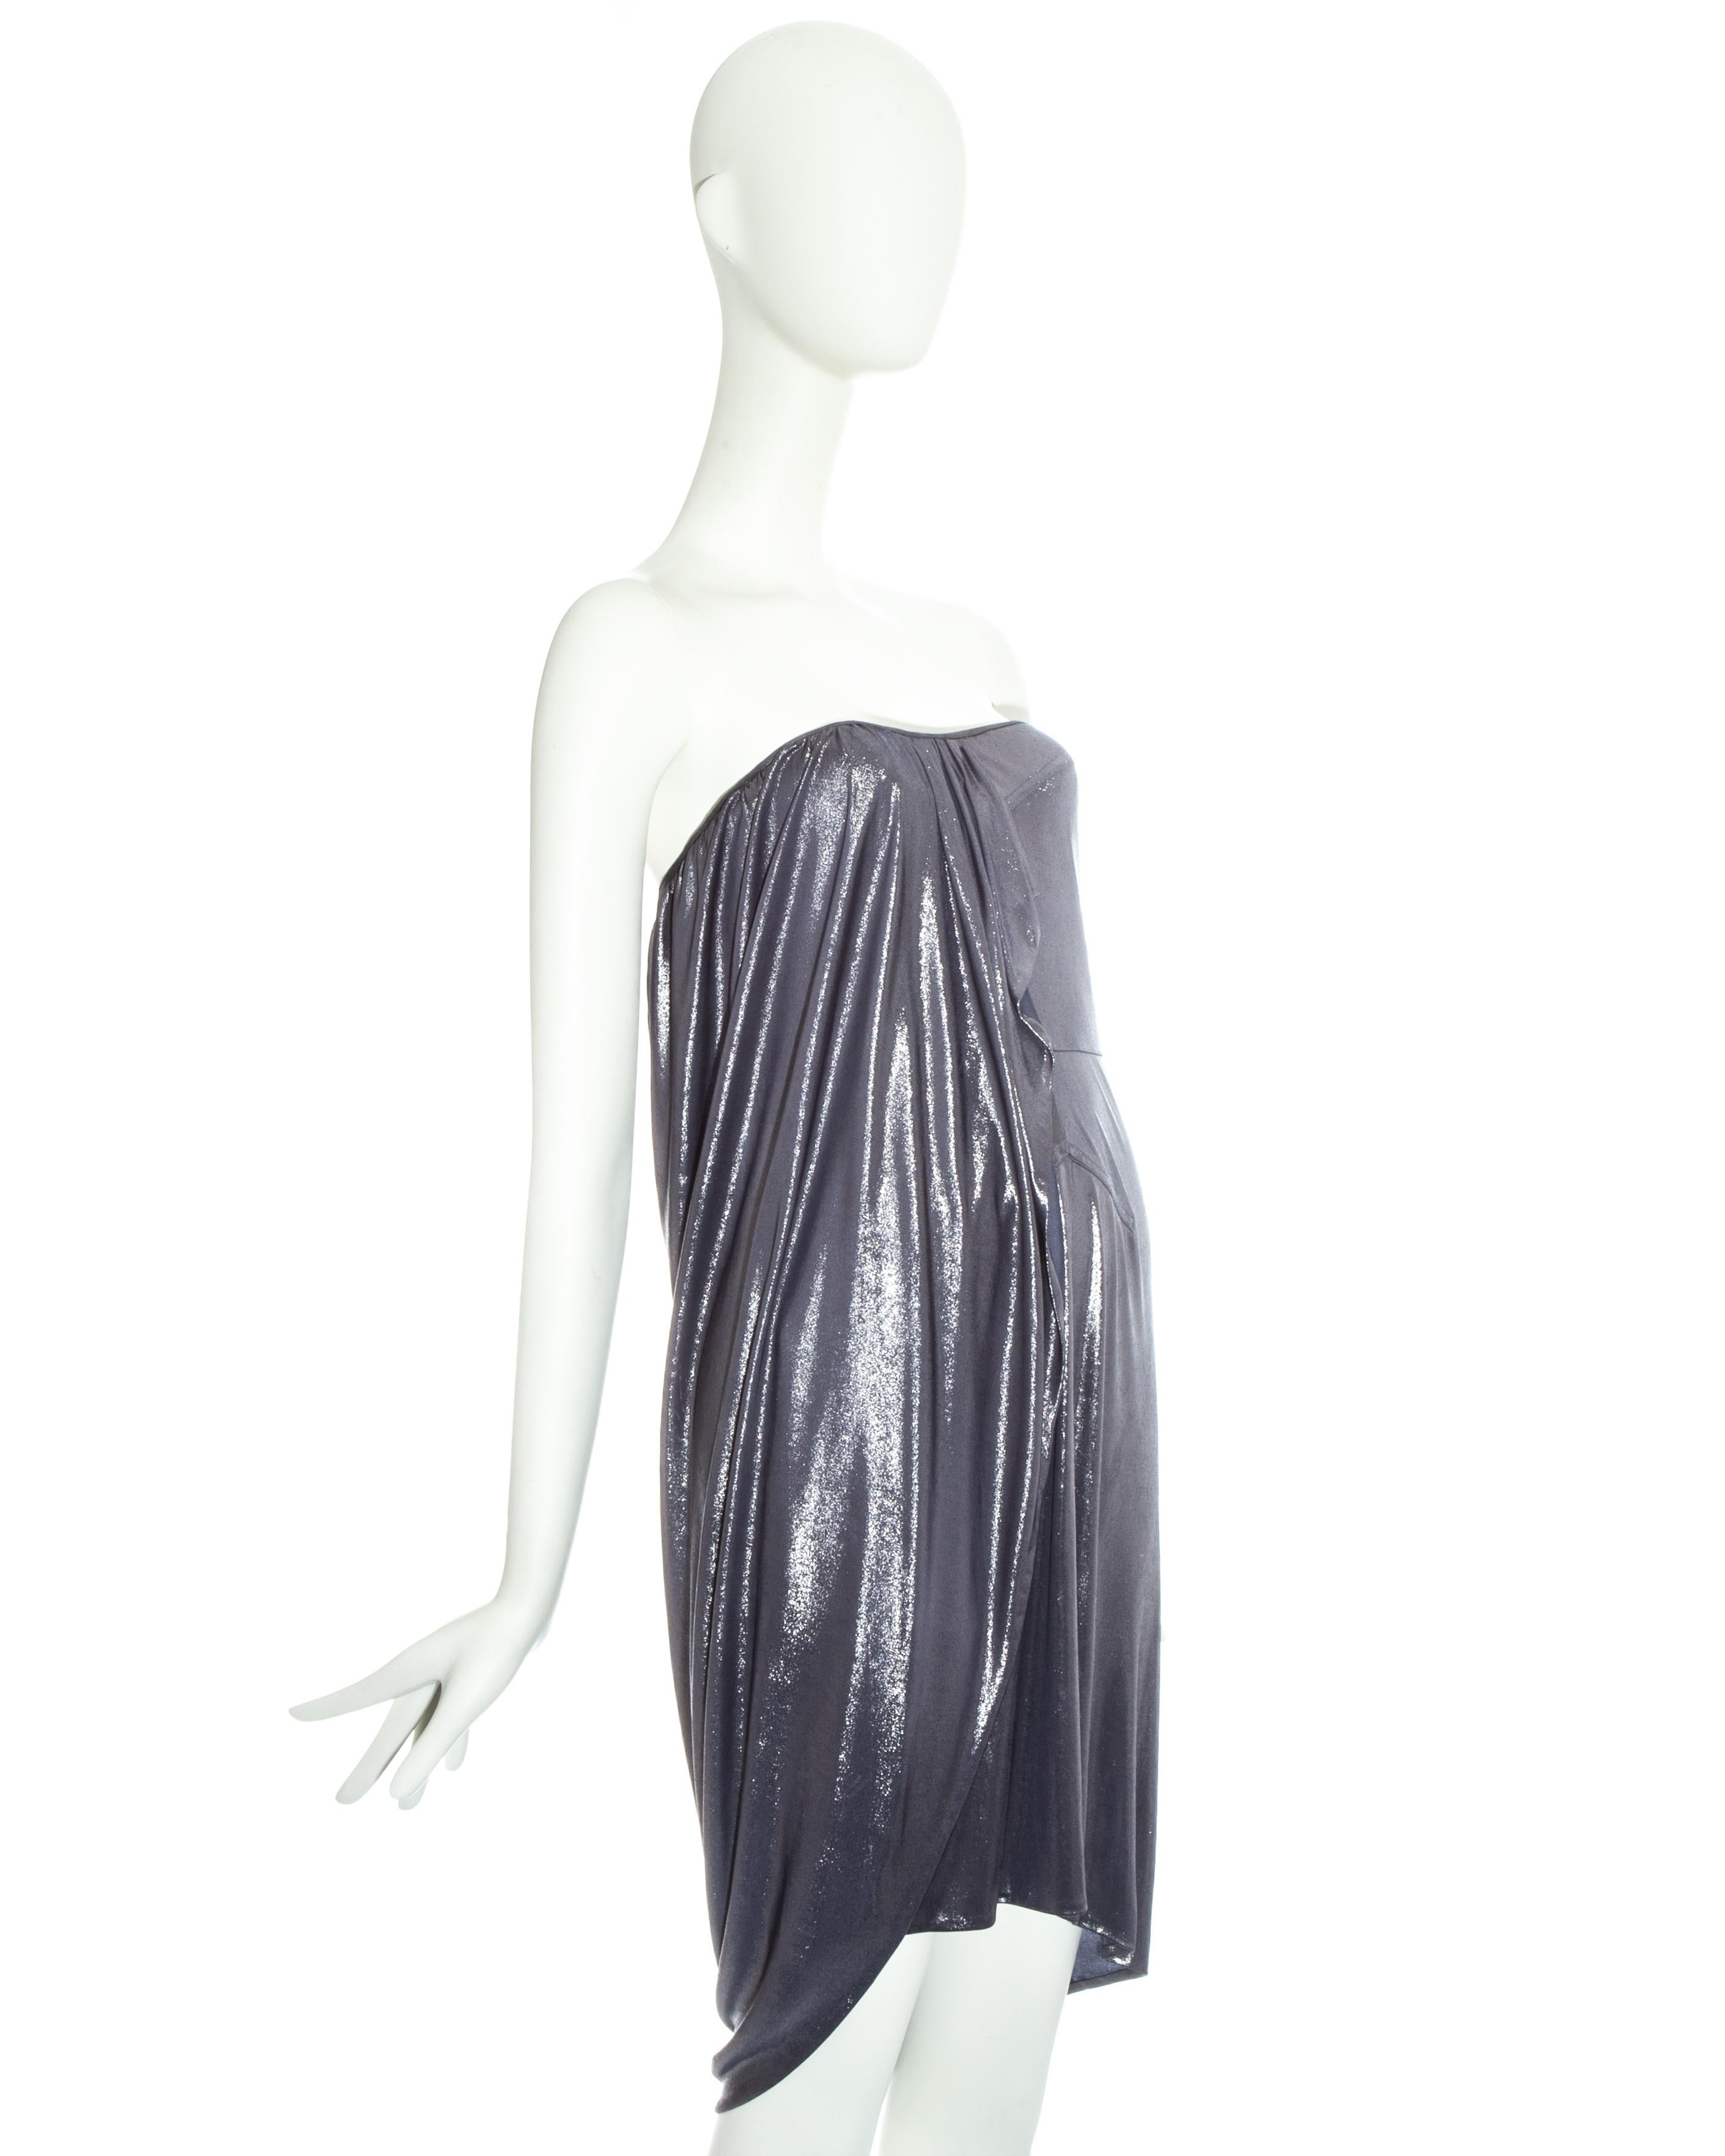 Christian Dior by John Galliano metallic silver strapless draped evening dress with built in corset and optional shoulder straps

Resort 2007